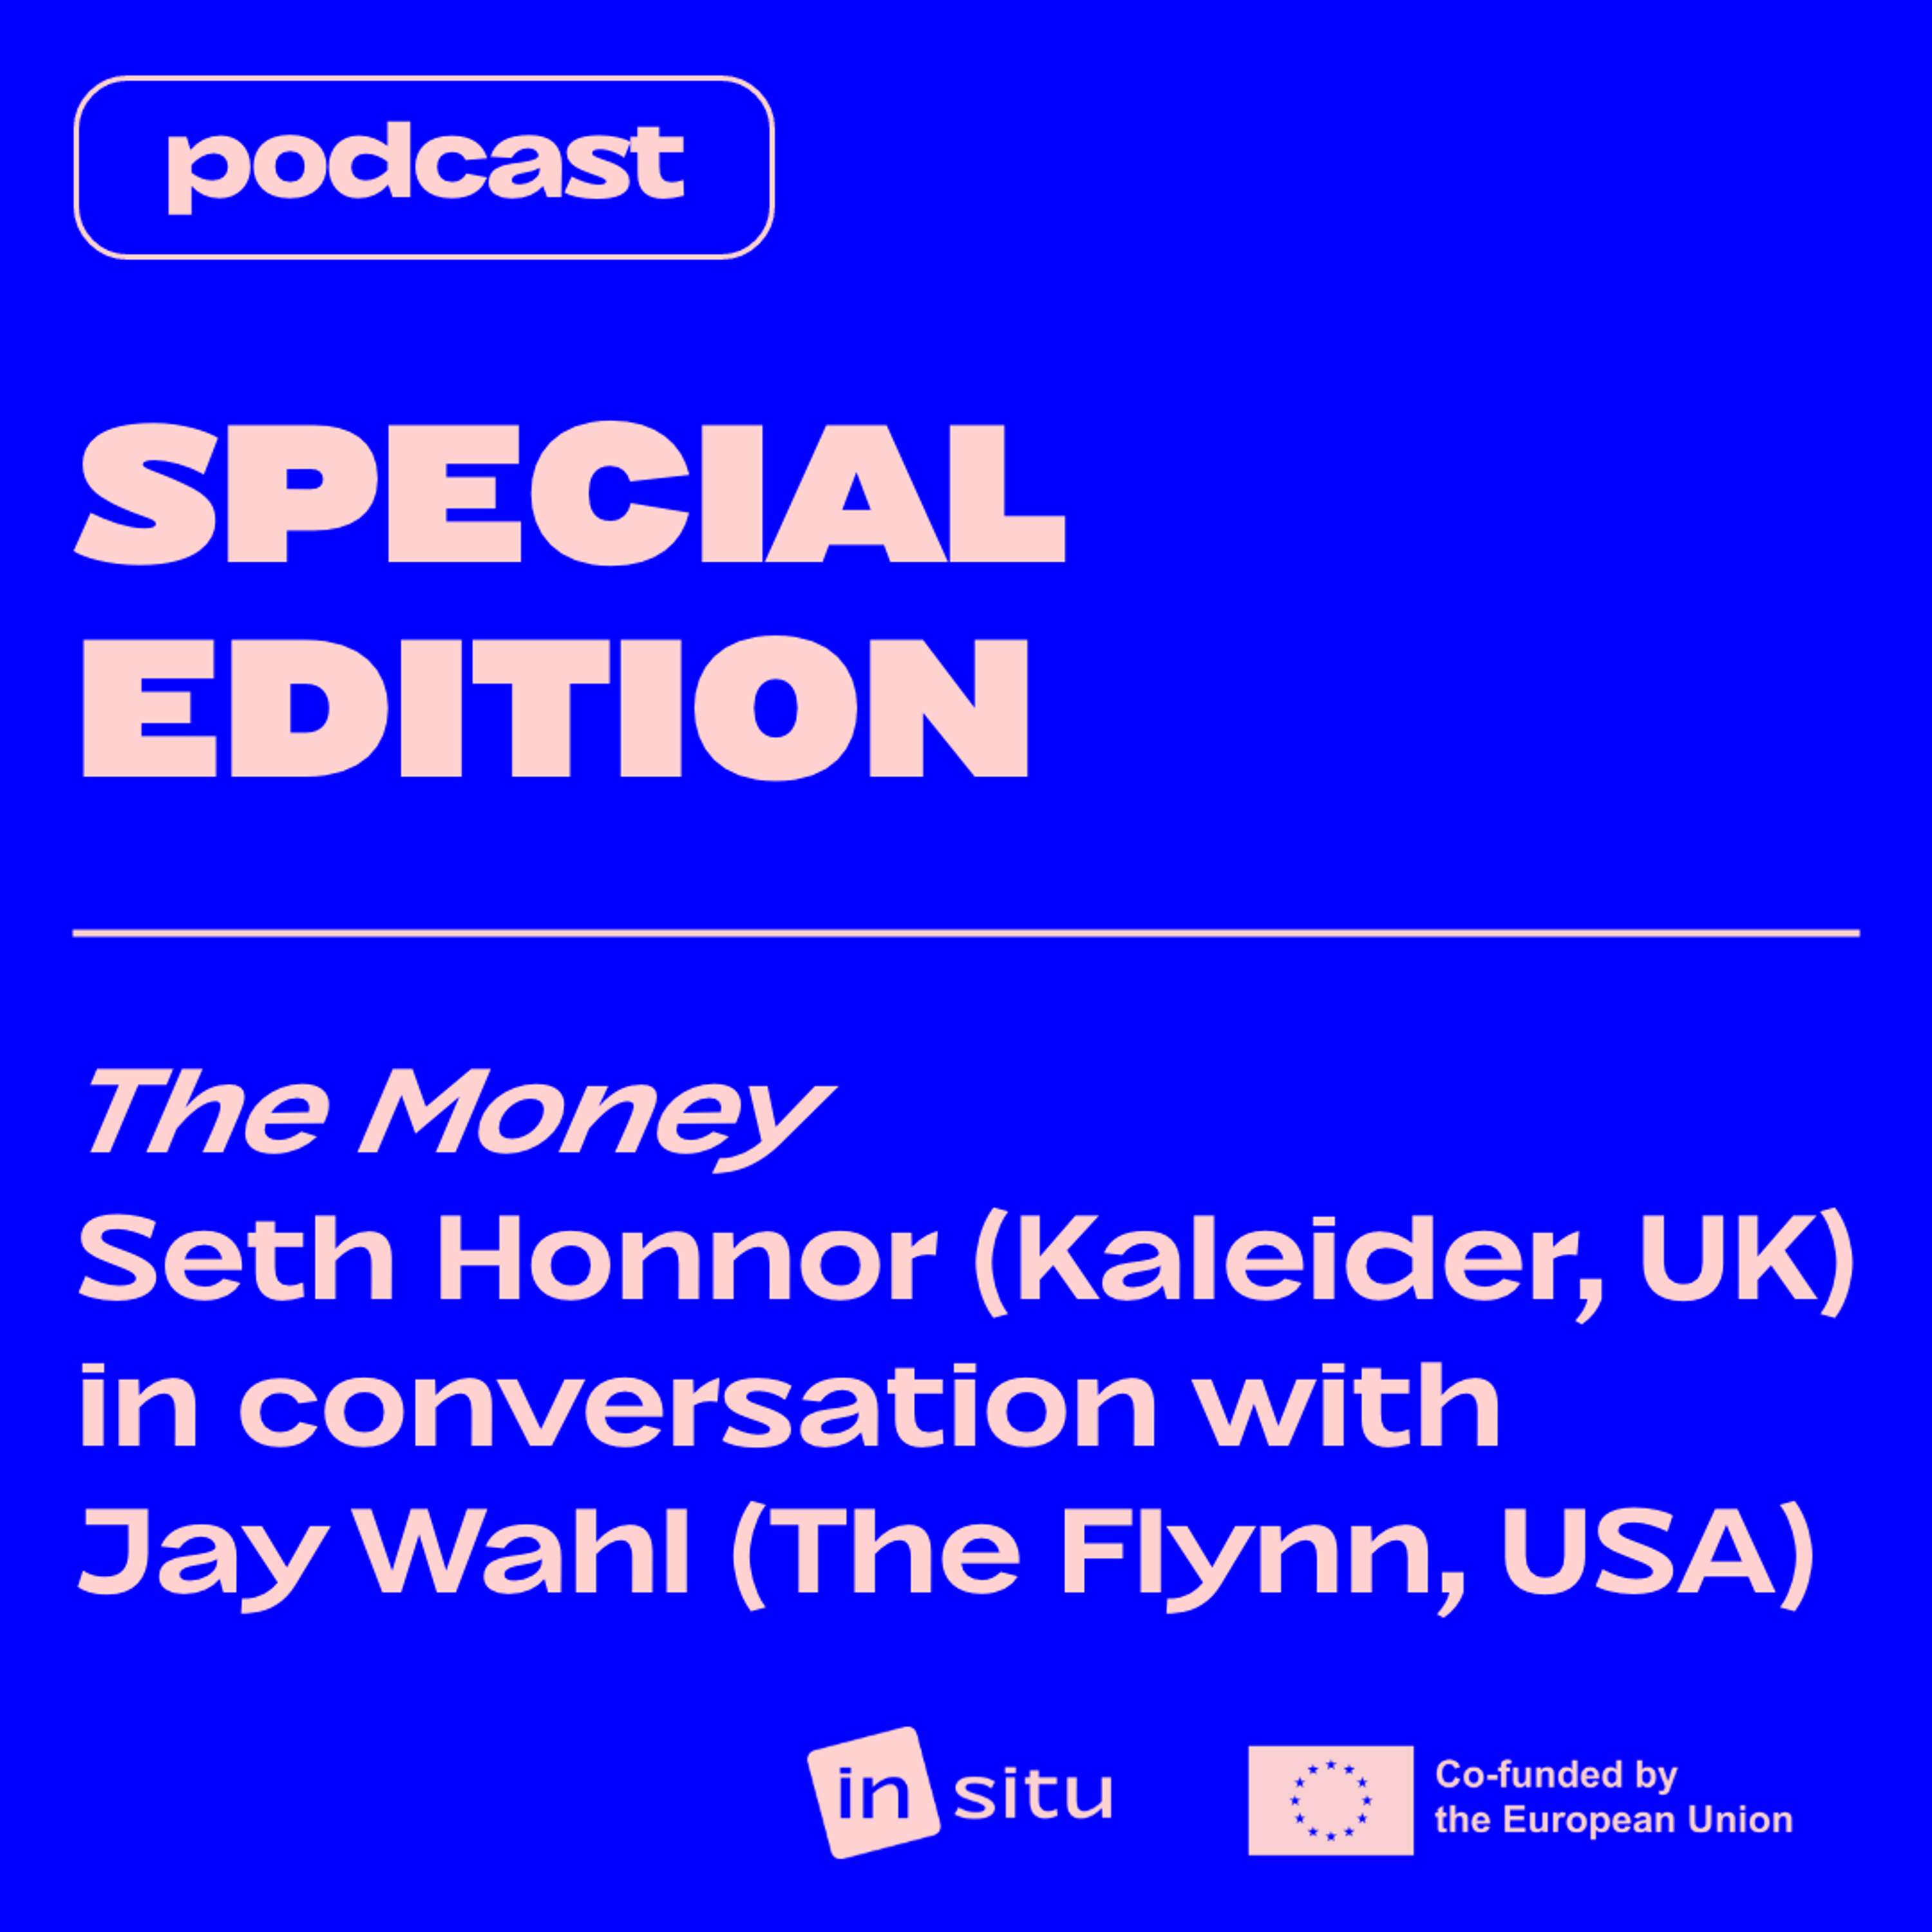 SPECIAL EDITION — Seth Honnor from Kaleider meets Jay Wahl from The Flynn